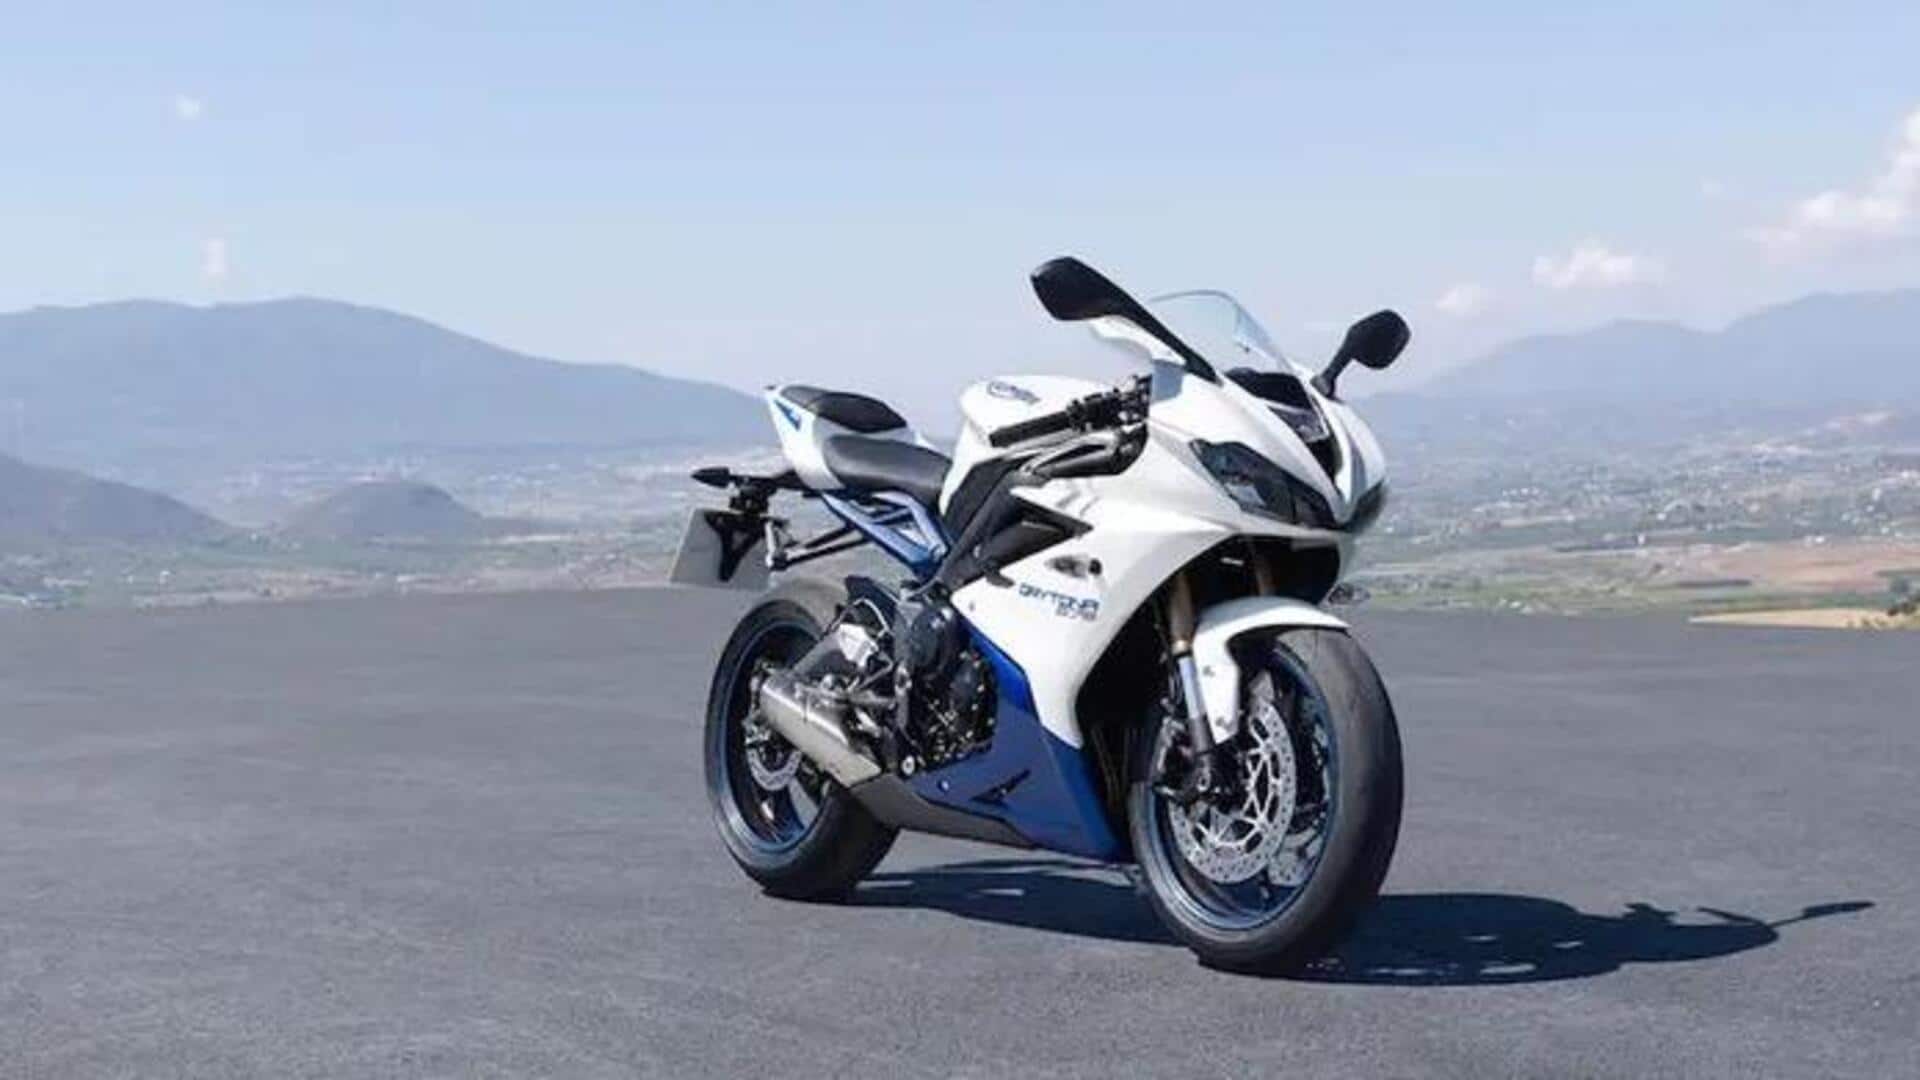 Triumph India to soon launch Daytona 660: What to expect